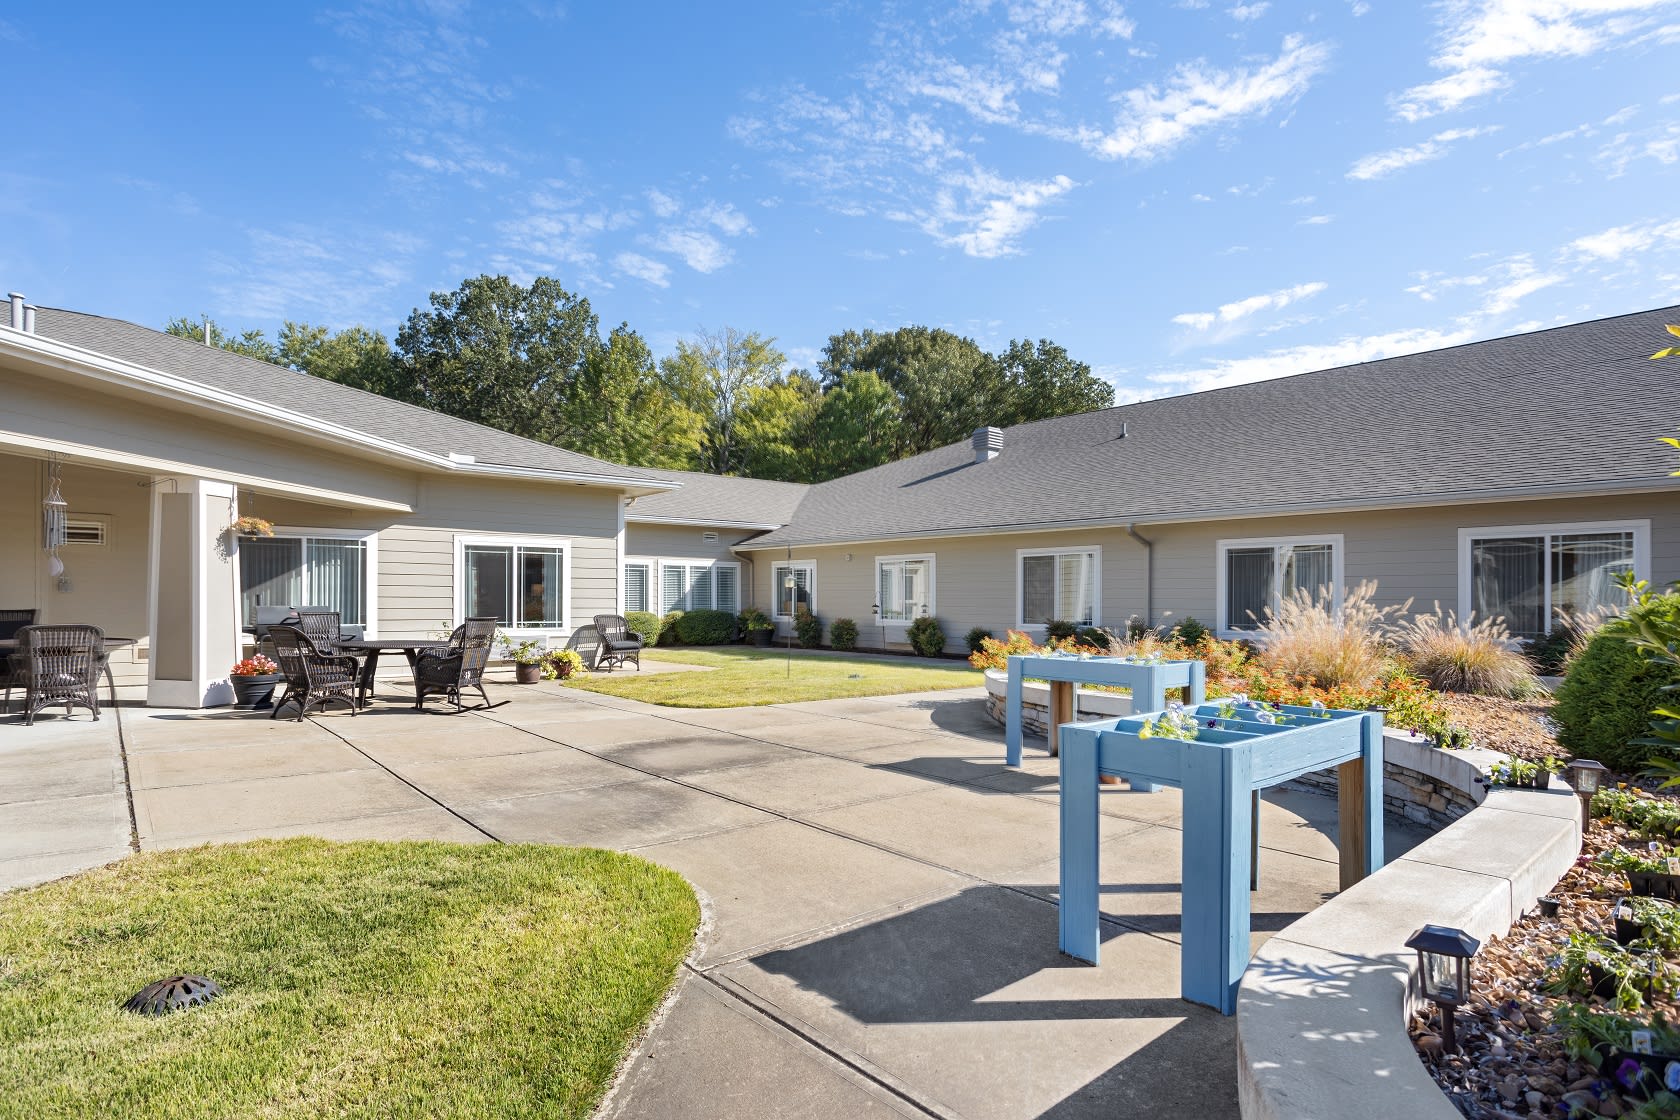 Quail Ridge Transitional Assisted Living and Memory Care patio